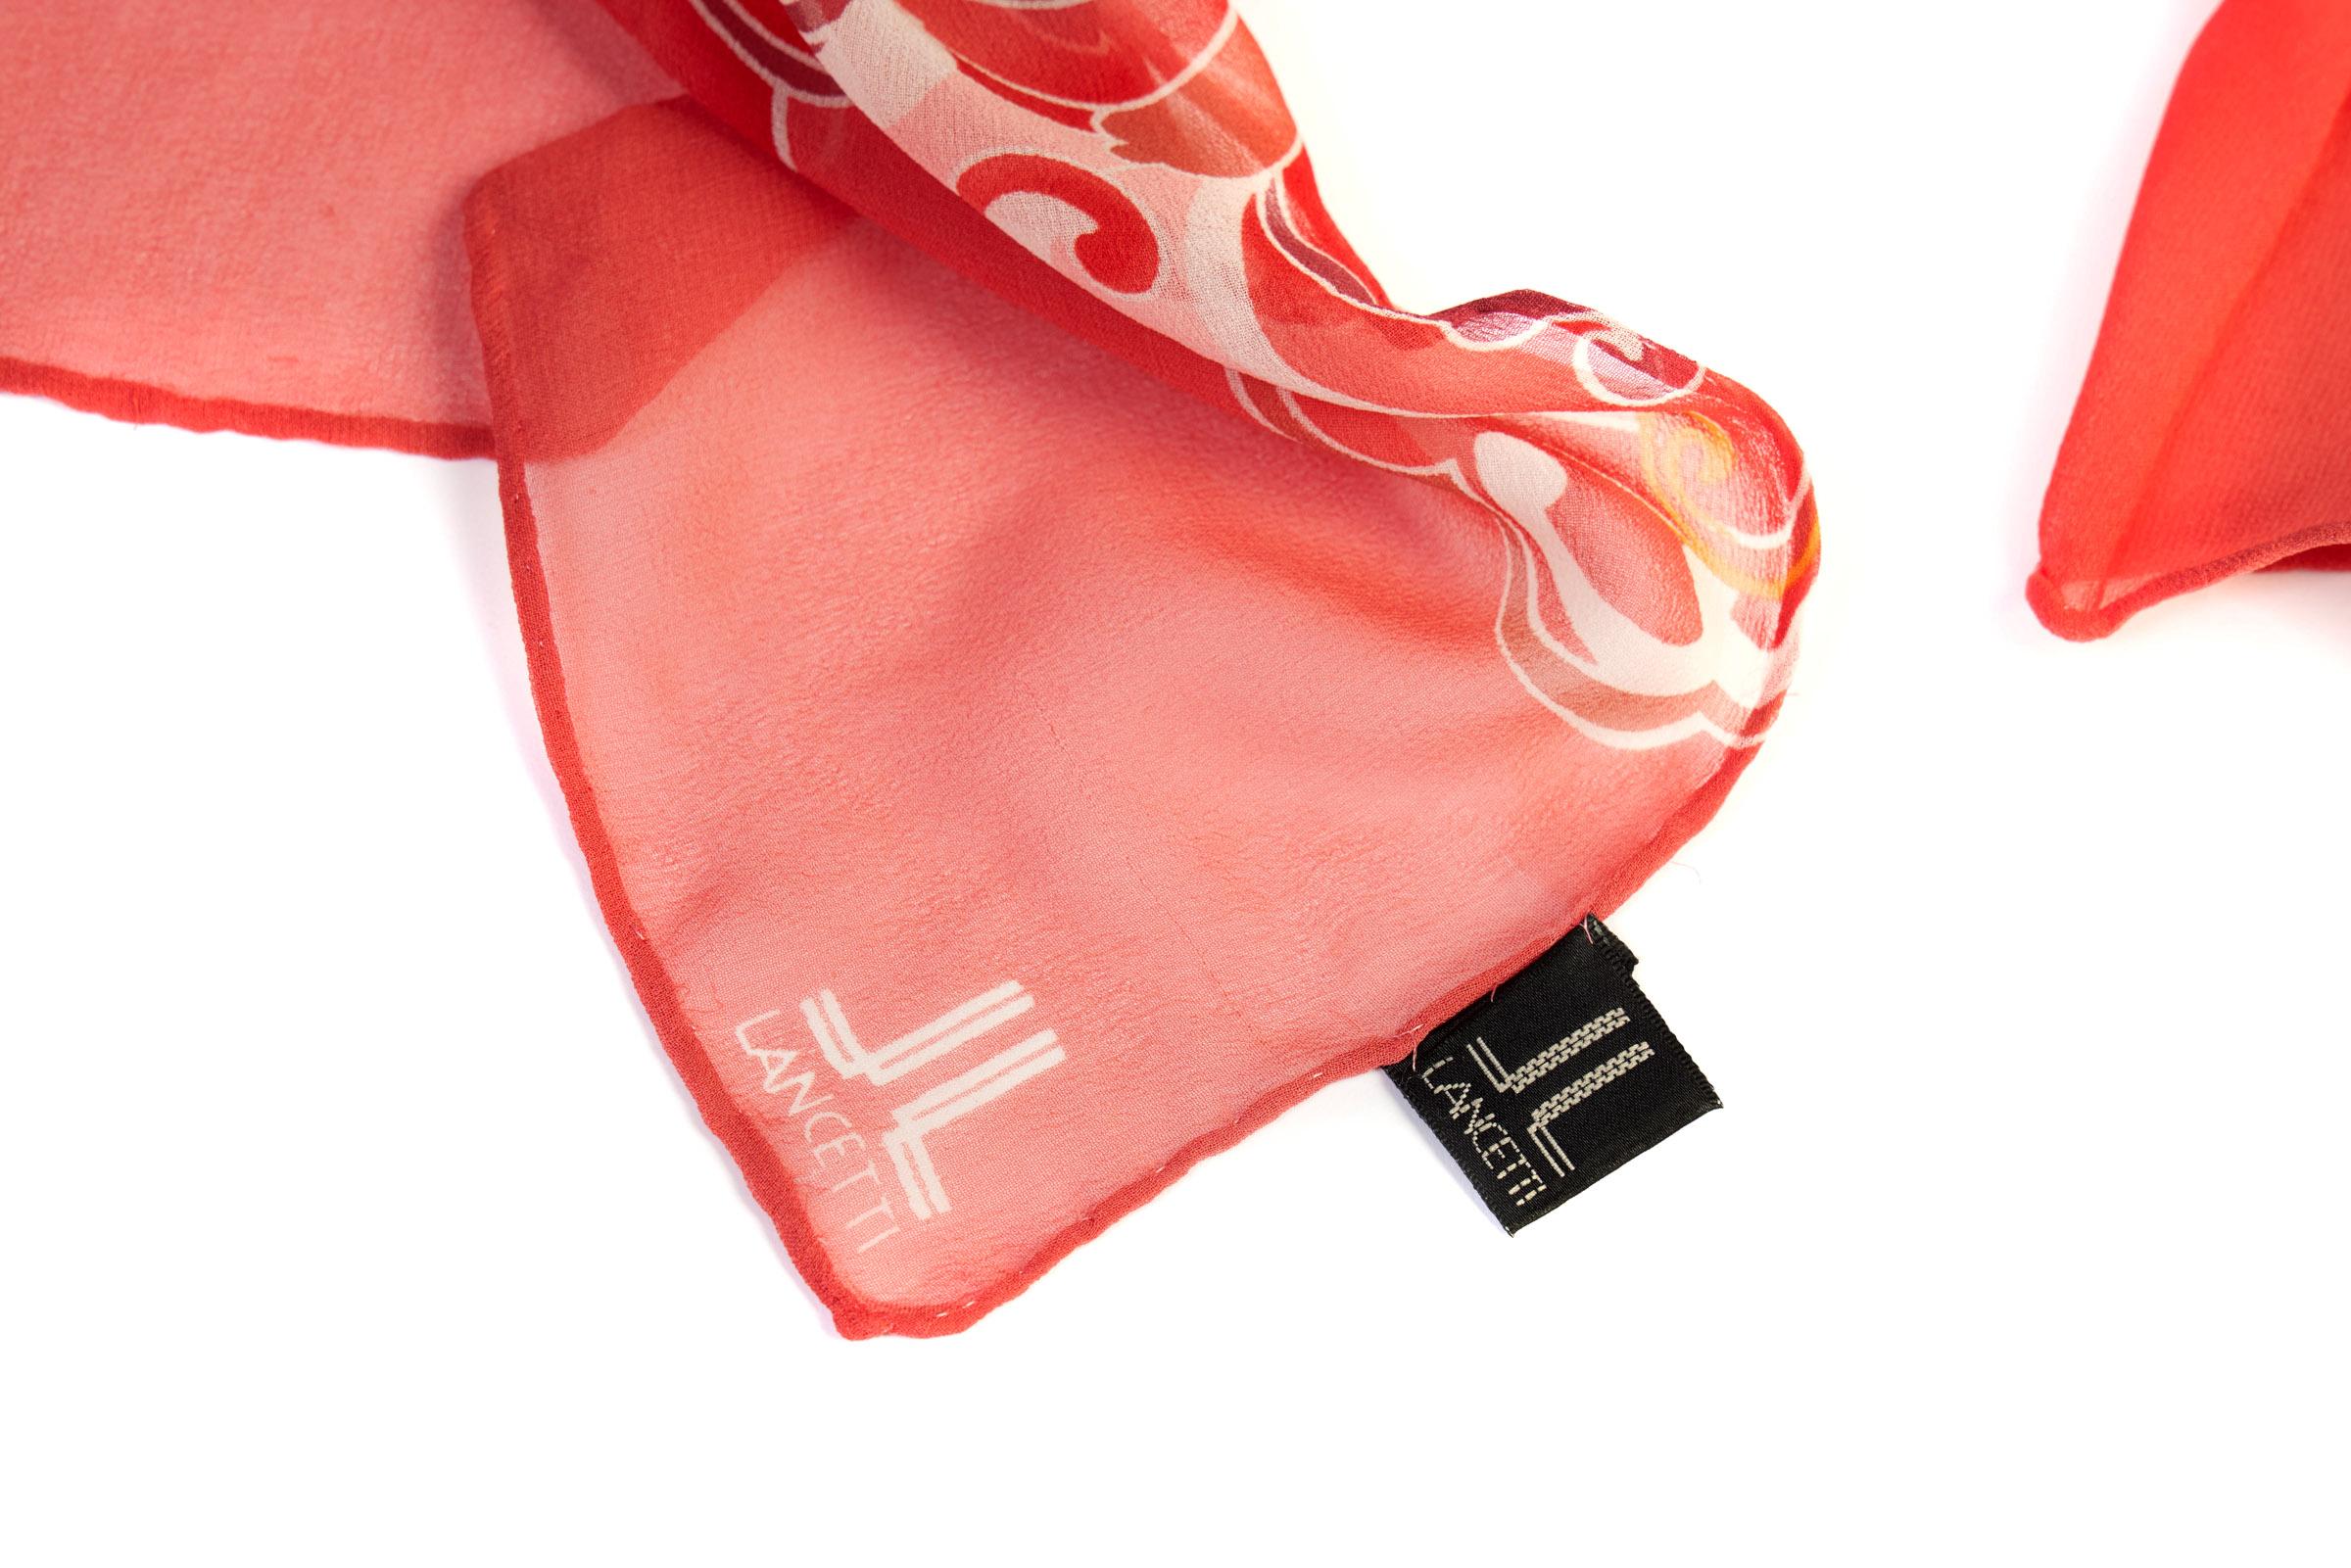 Lancetti Coral Silk Chiffon Scarf In Good Condition For Sale In West Hollywood, CA